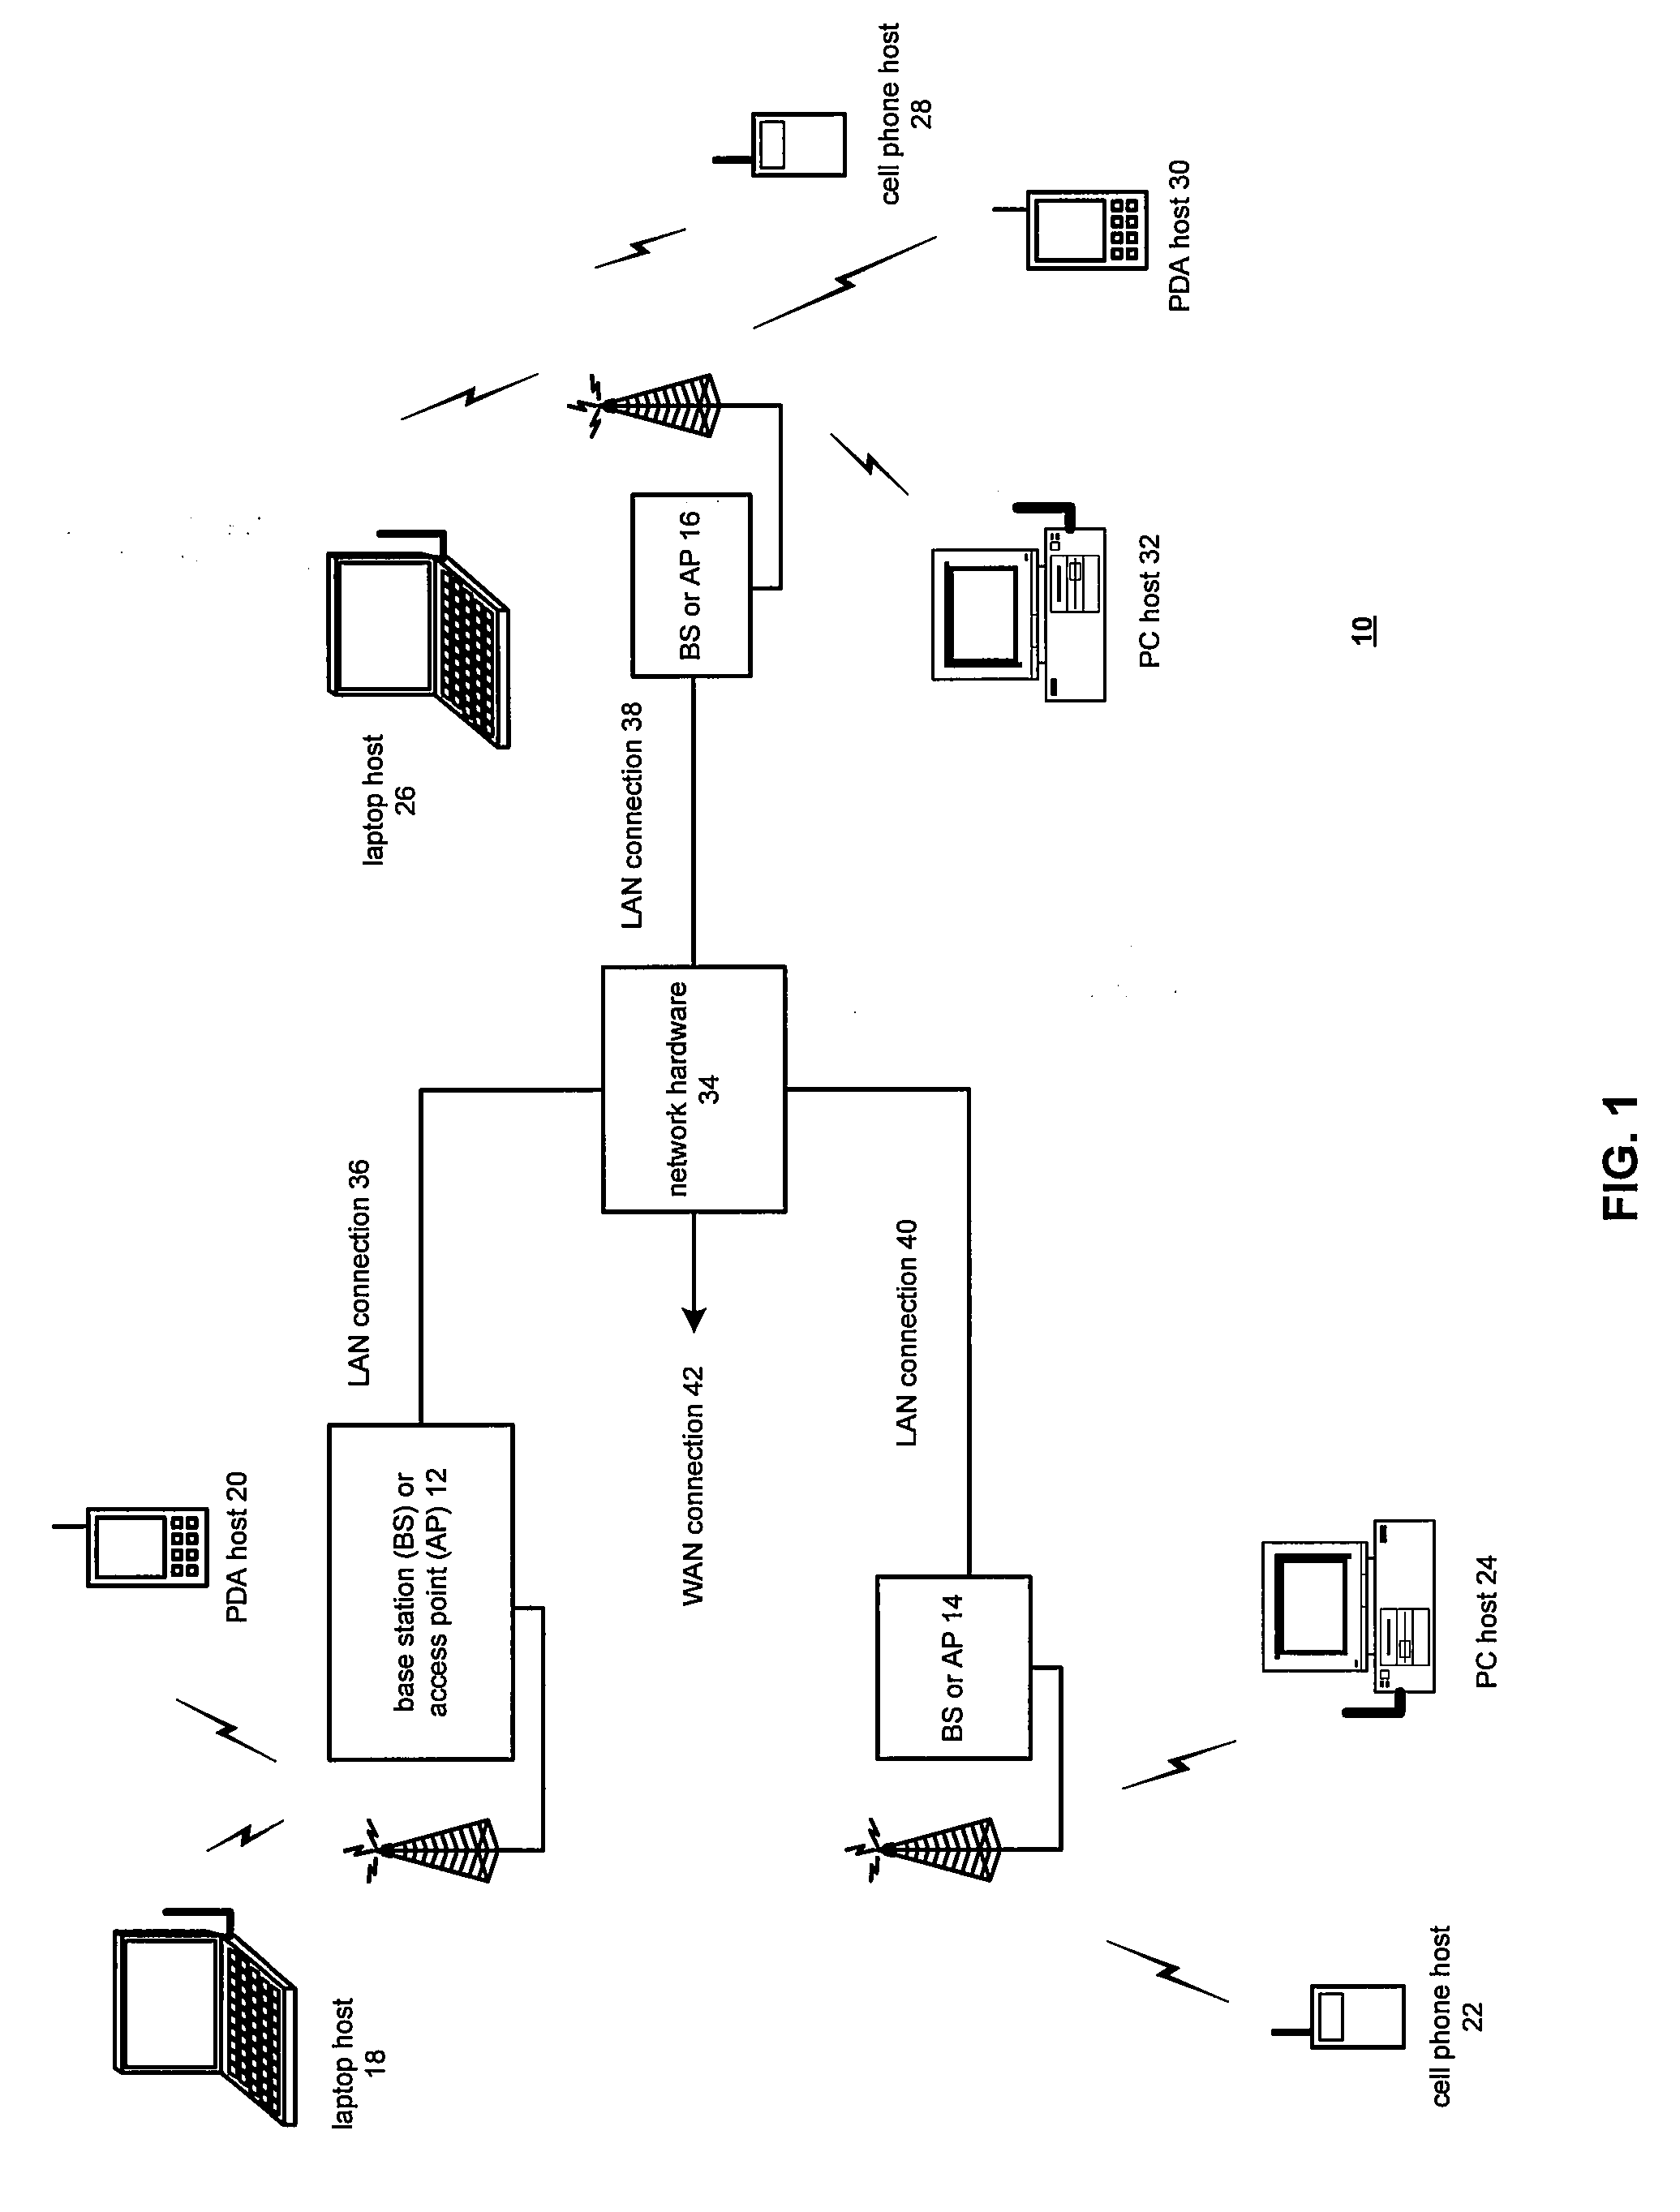 Method and system for a subband acoustic echo canceller with integrated voice activity detection